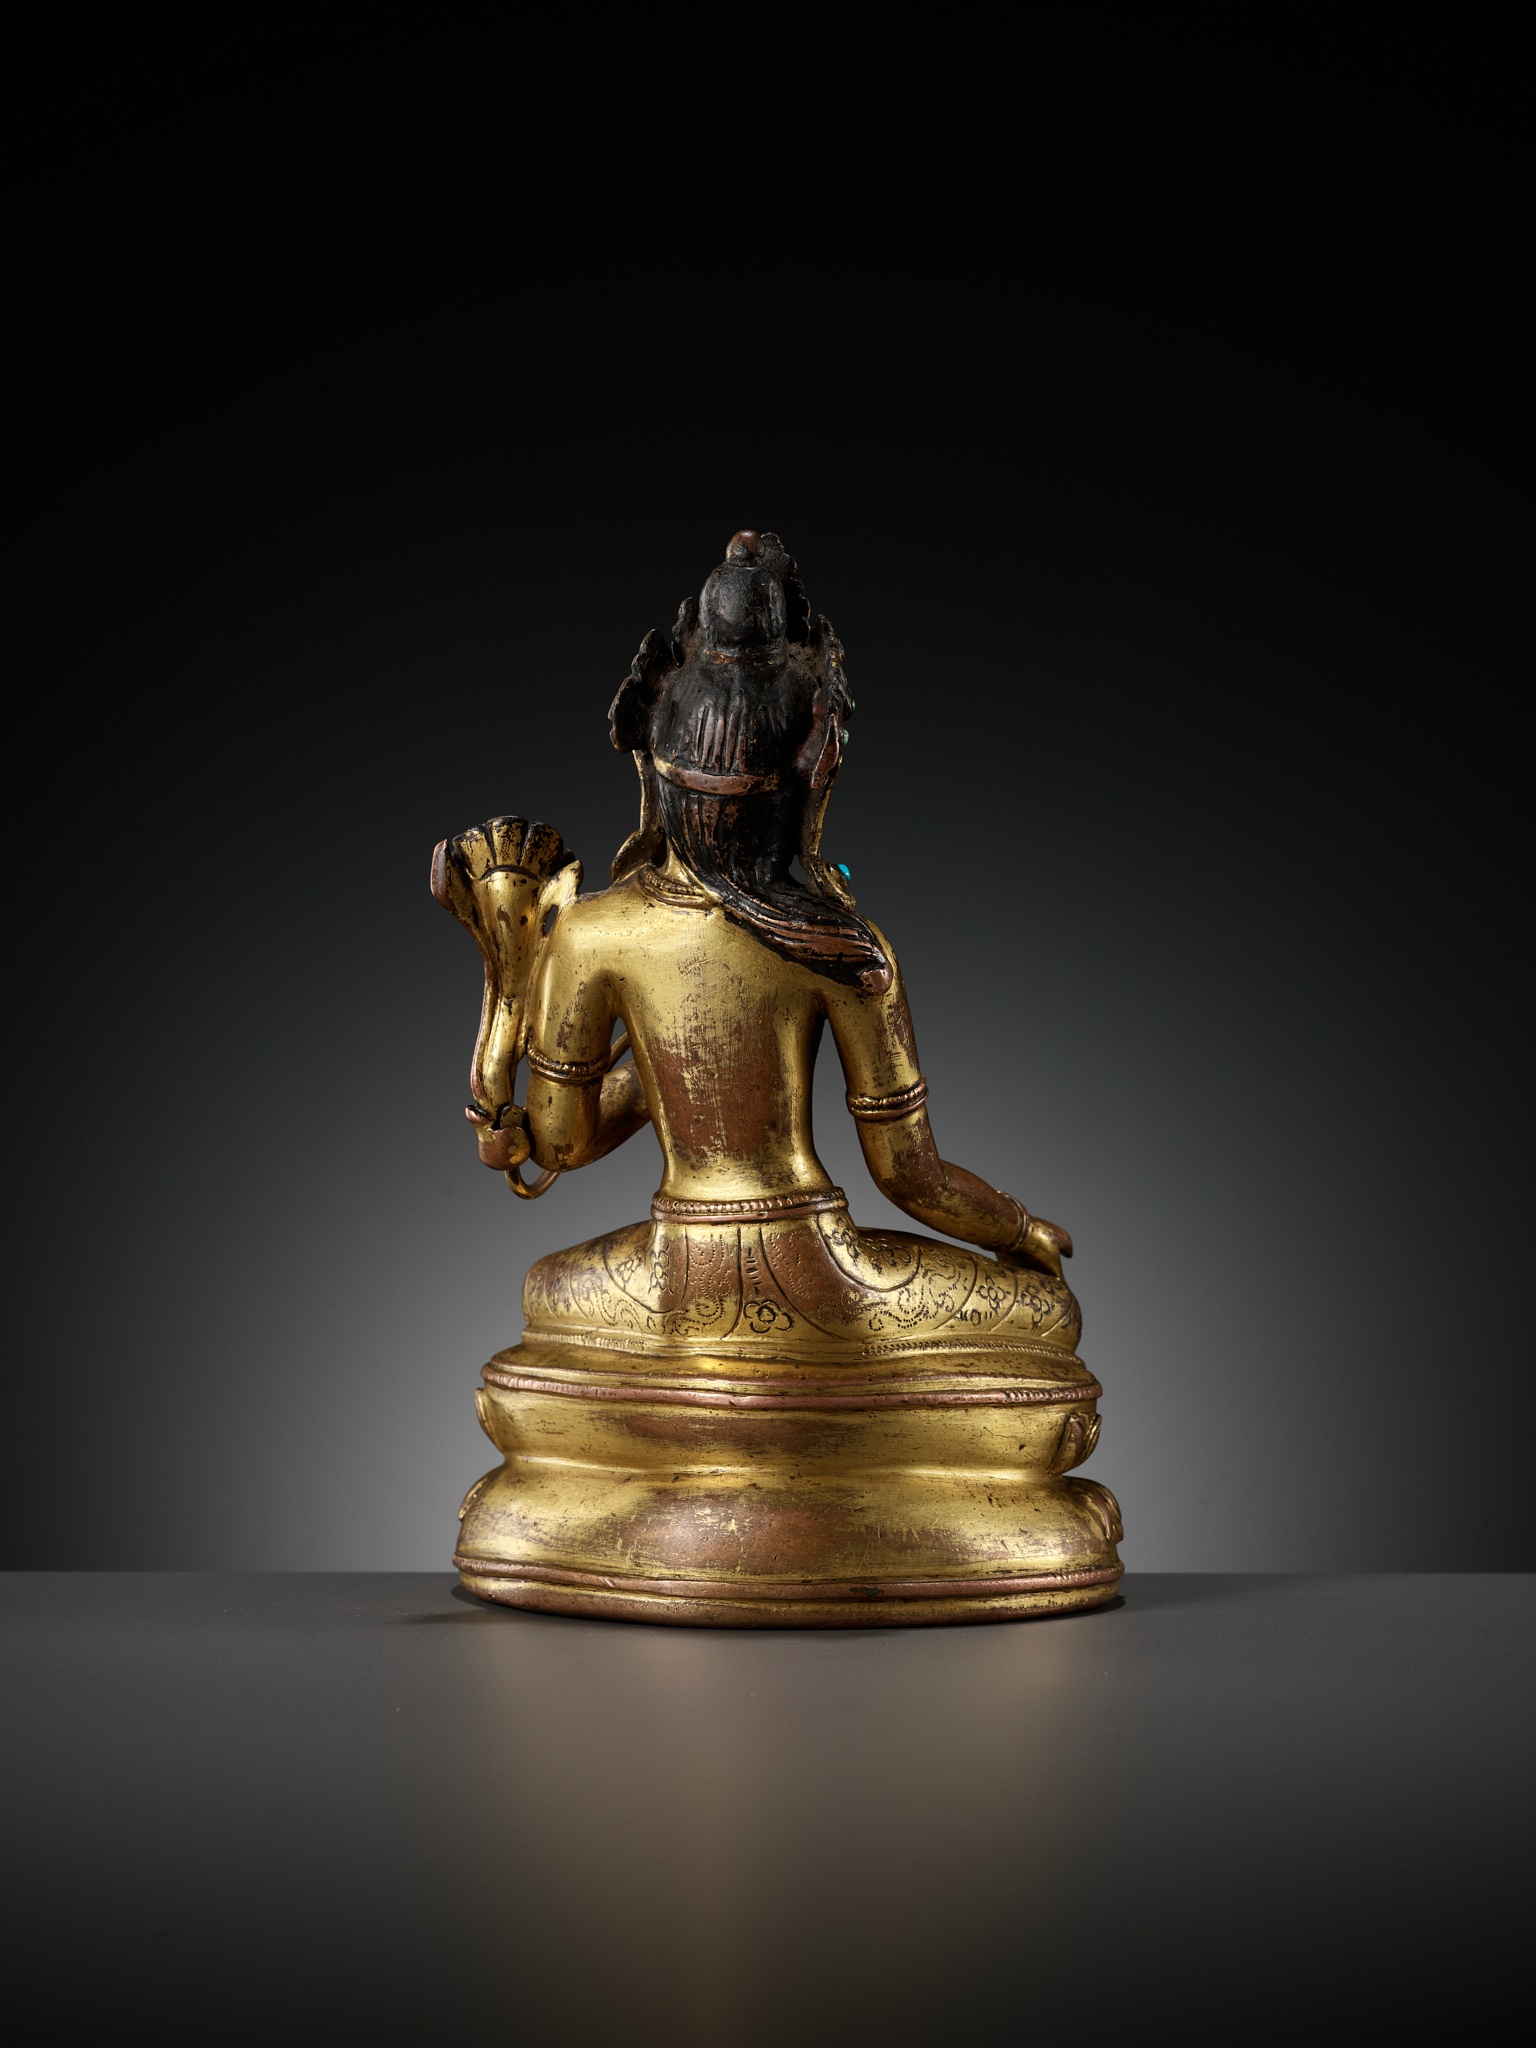 A GILT AND TURQUOISE-INLAID COPPER ALLOY FIGURE OF GREEN TARA, DENSATIL STYLE, TIBET, 14TH CENTURY - Image 11 of 16